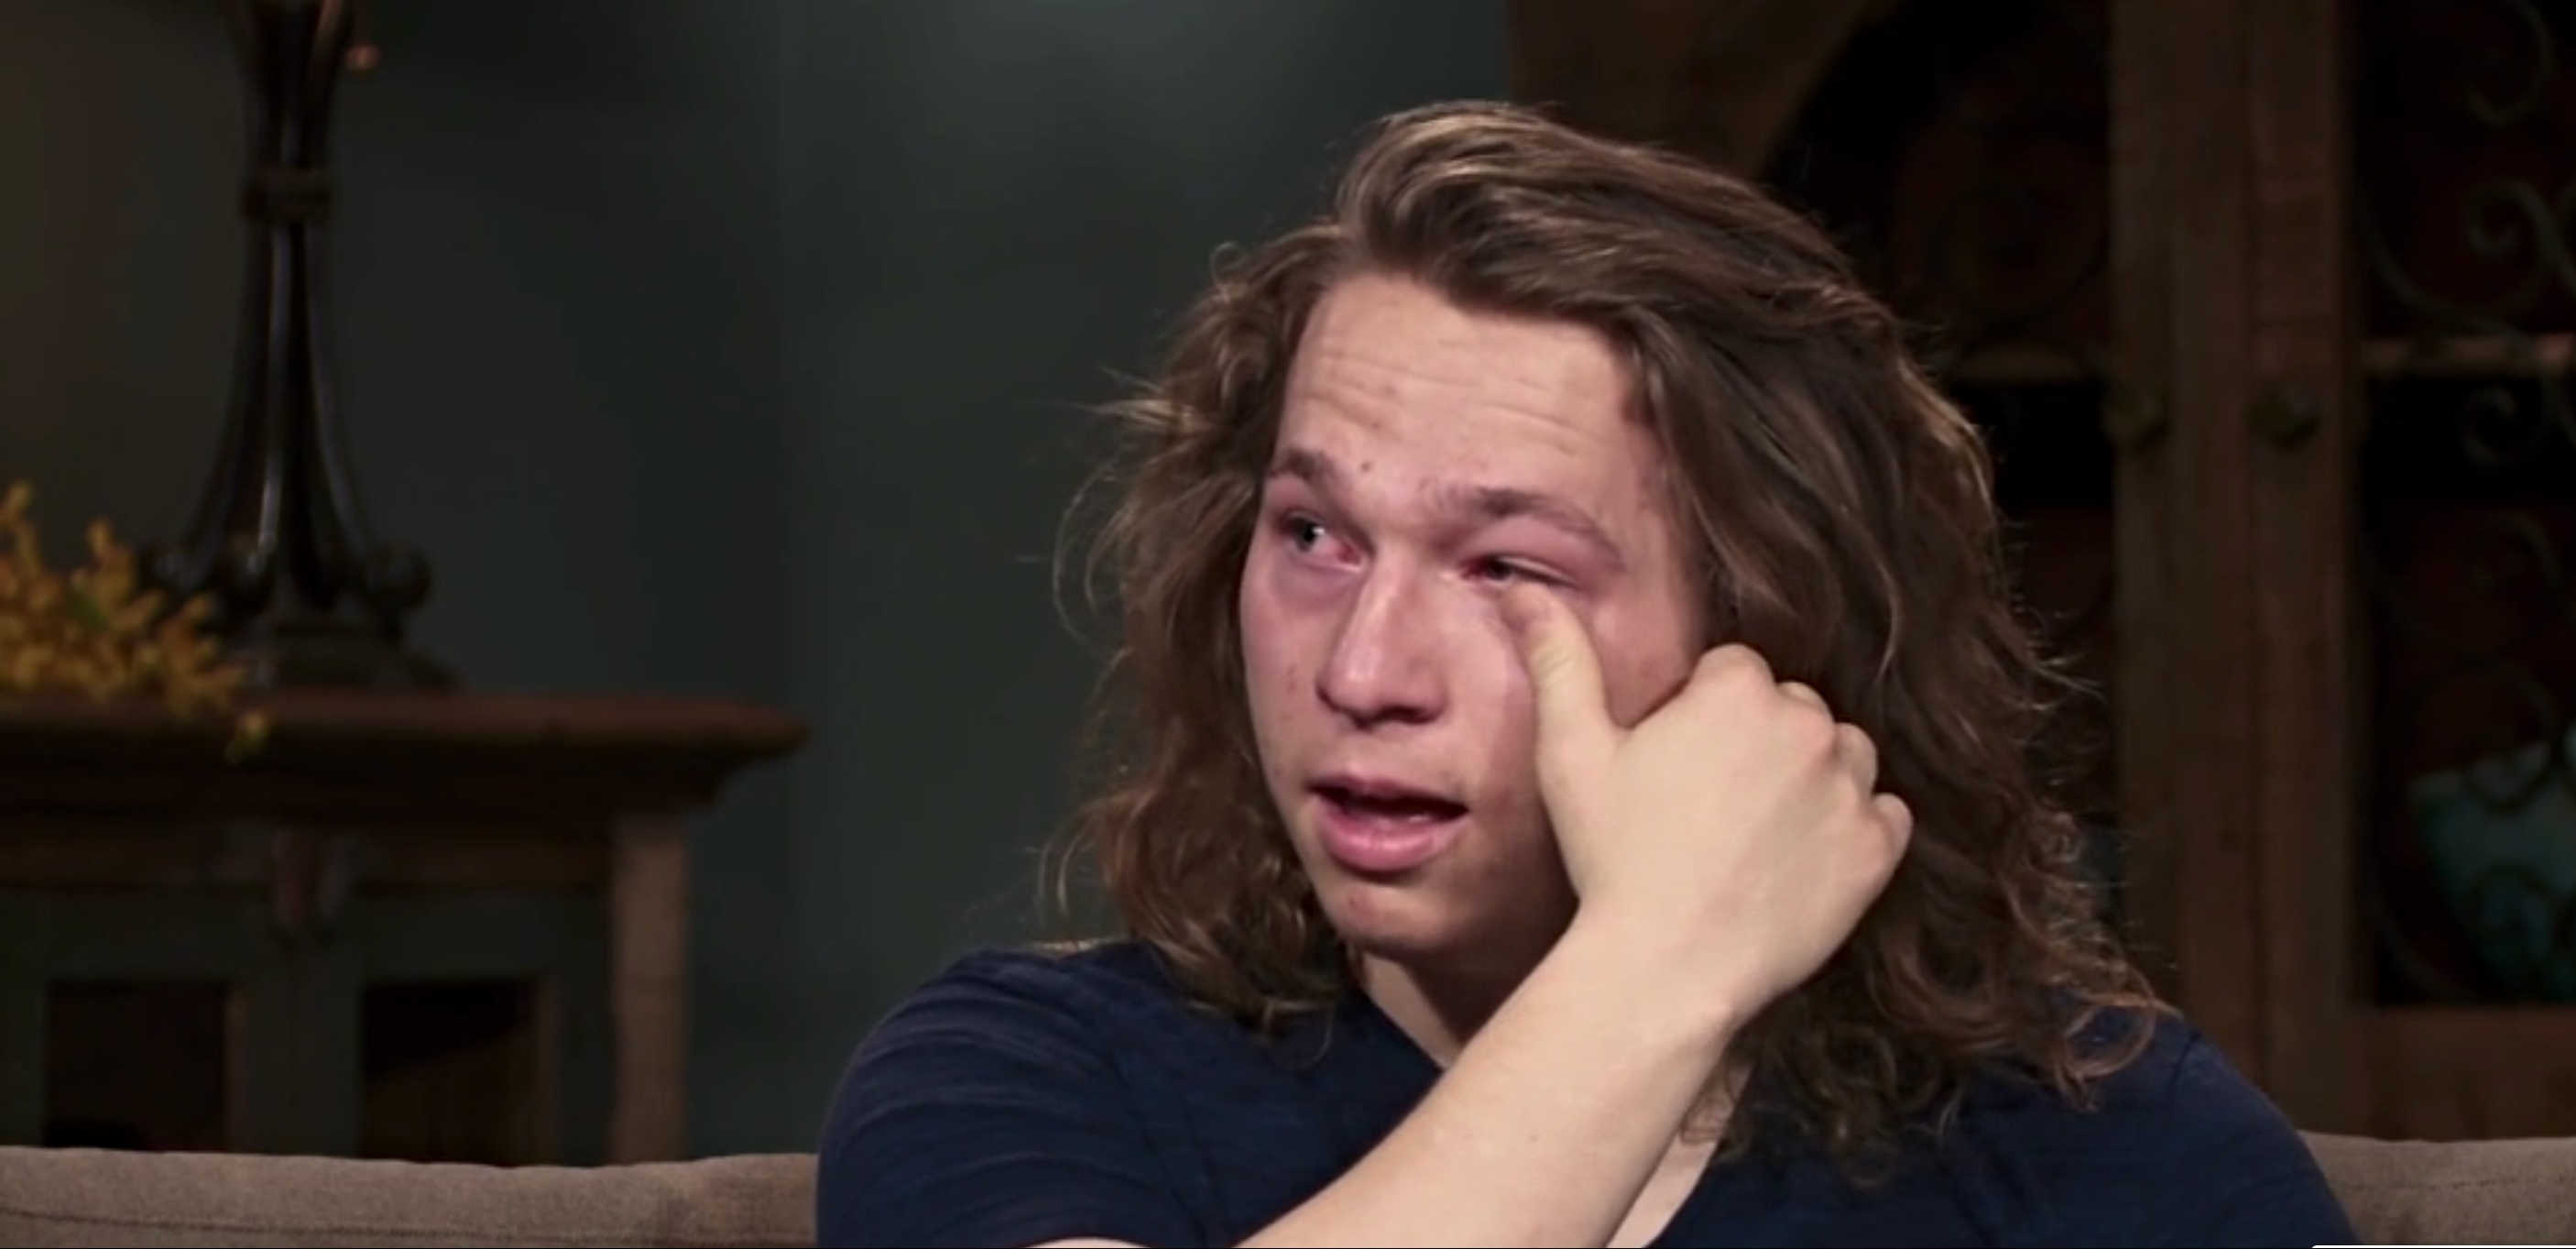 Gabriel 'Gabe' Brown crying during the confessional on 'Sister Wives' | TLC